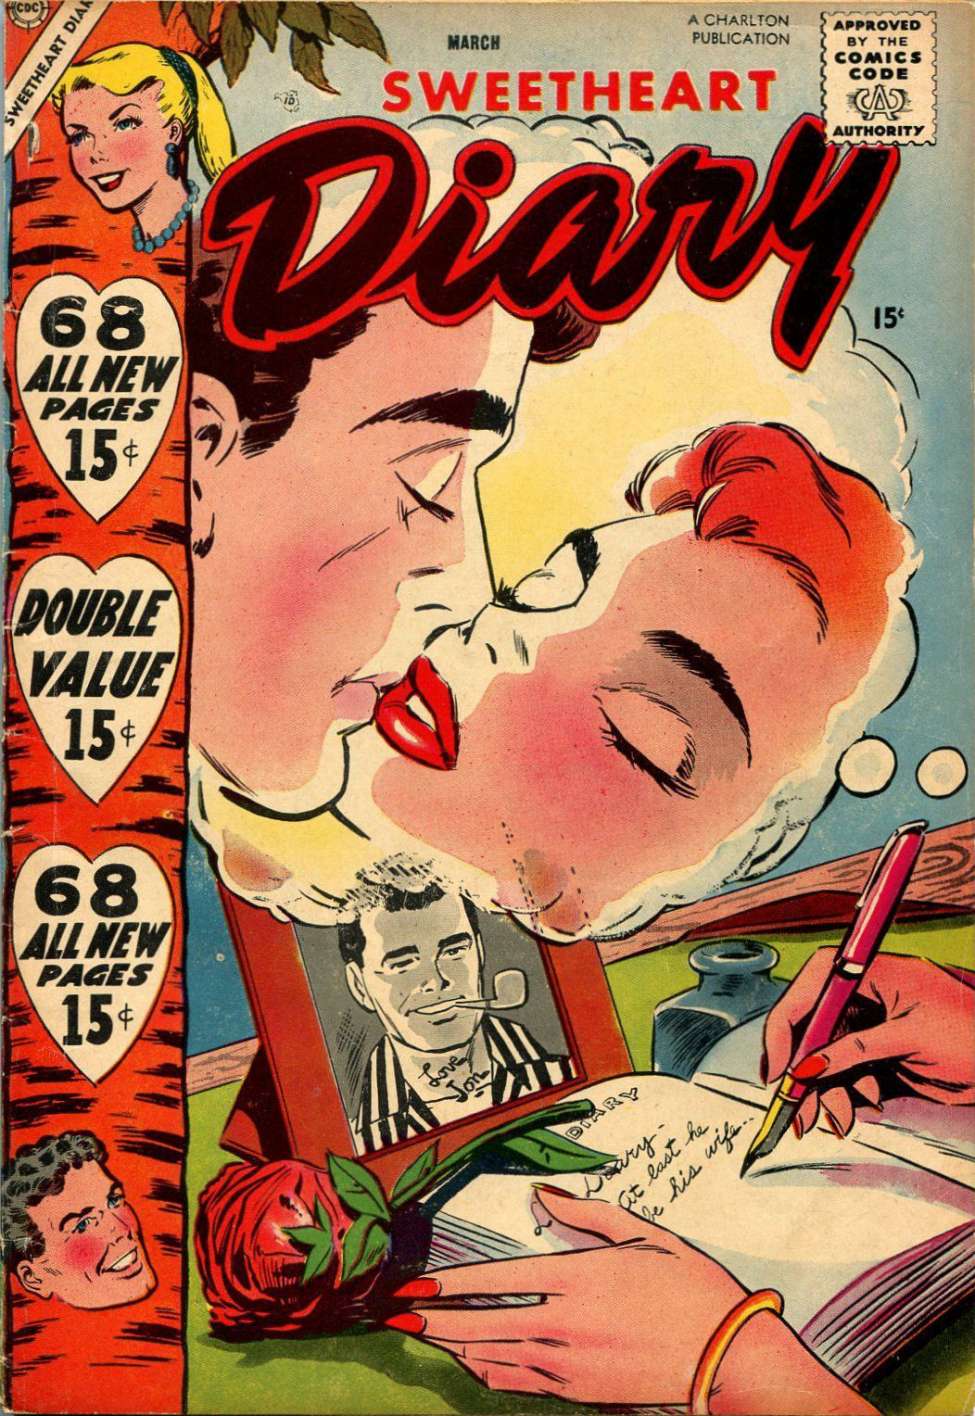 Book Cover For Sweetheart Diary 41